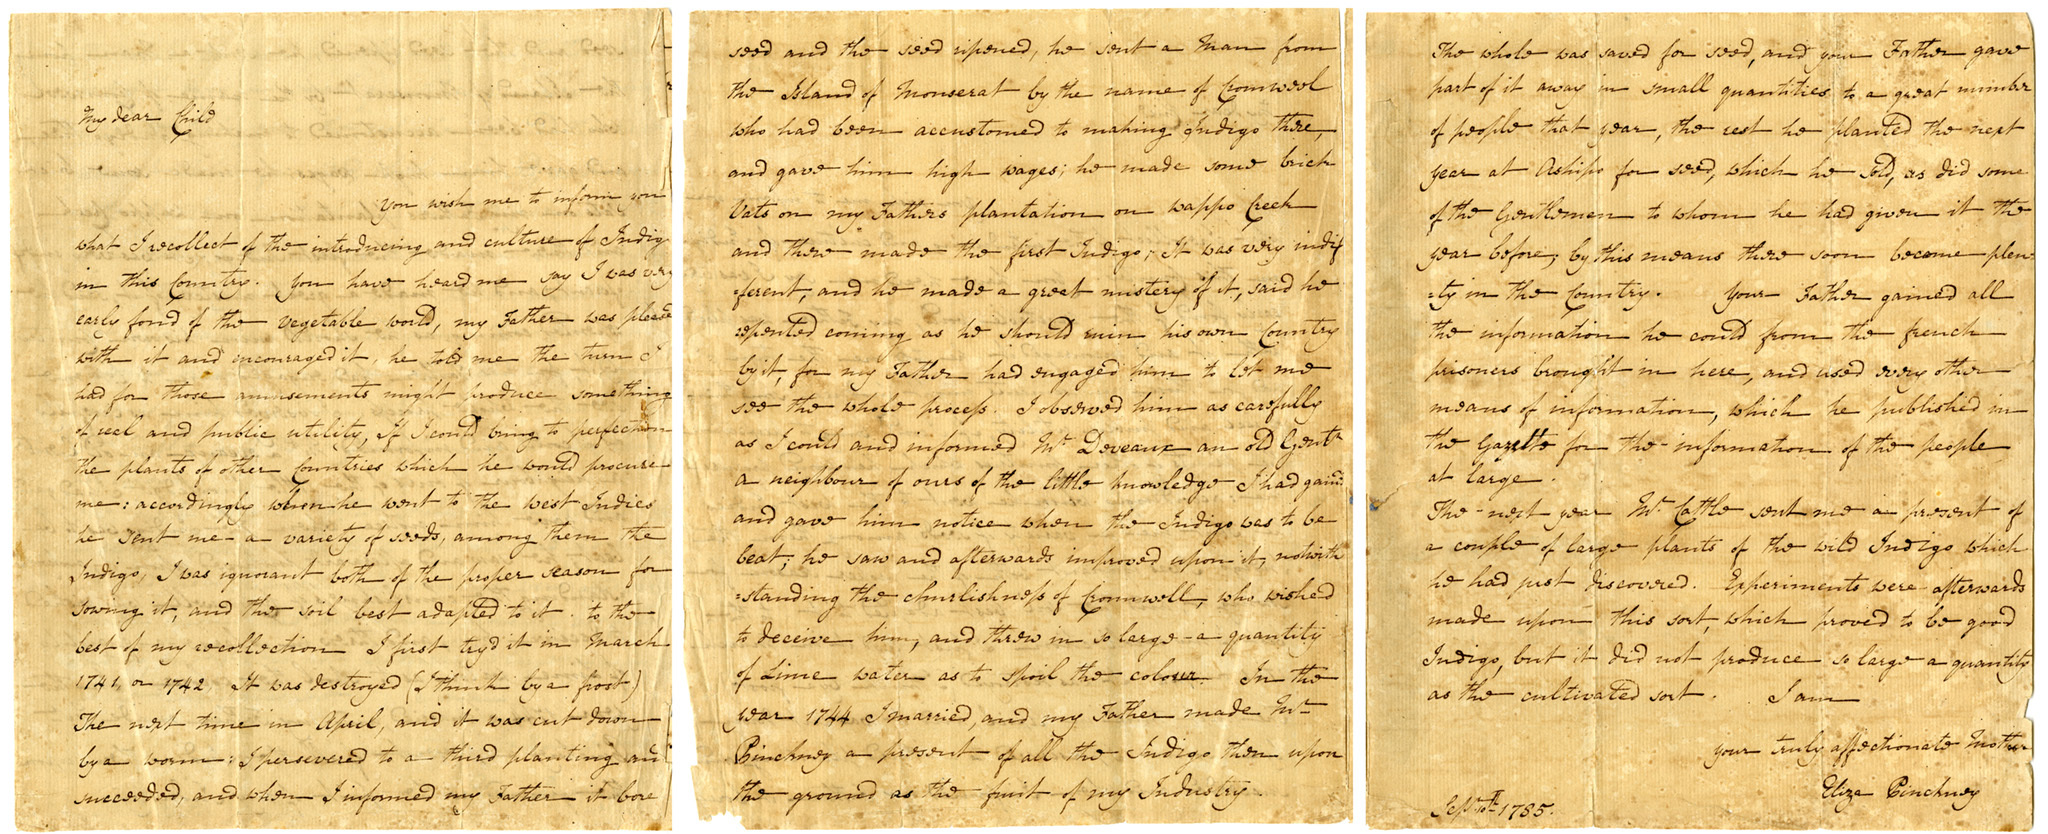 <b>Letter from Eliza Lucas Pinckney (1722-1796) to her son, Charles Cotesworth Pinckney (1746-1825), dated September 10th 1785, describing the early days of indigo cultivation in South Carolina during the 1740s. Courtesy of the Charleston Library Society.</b>